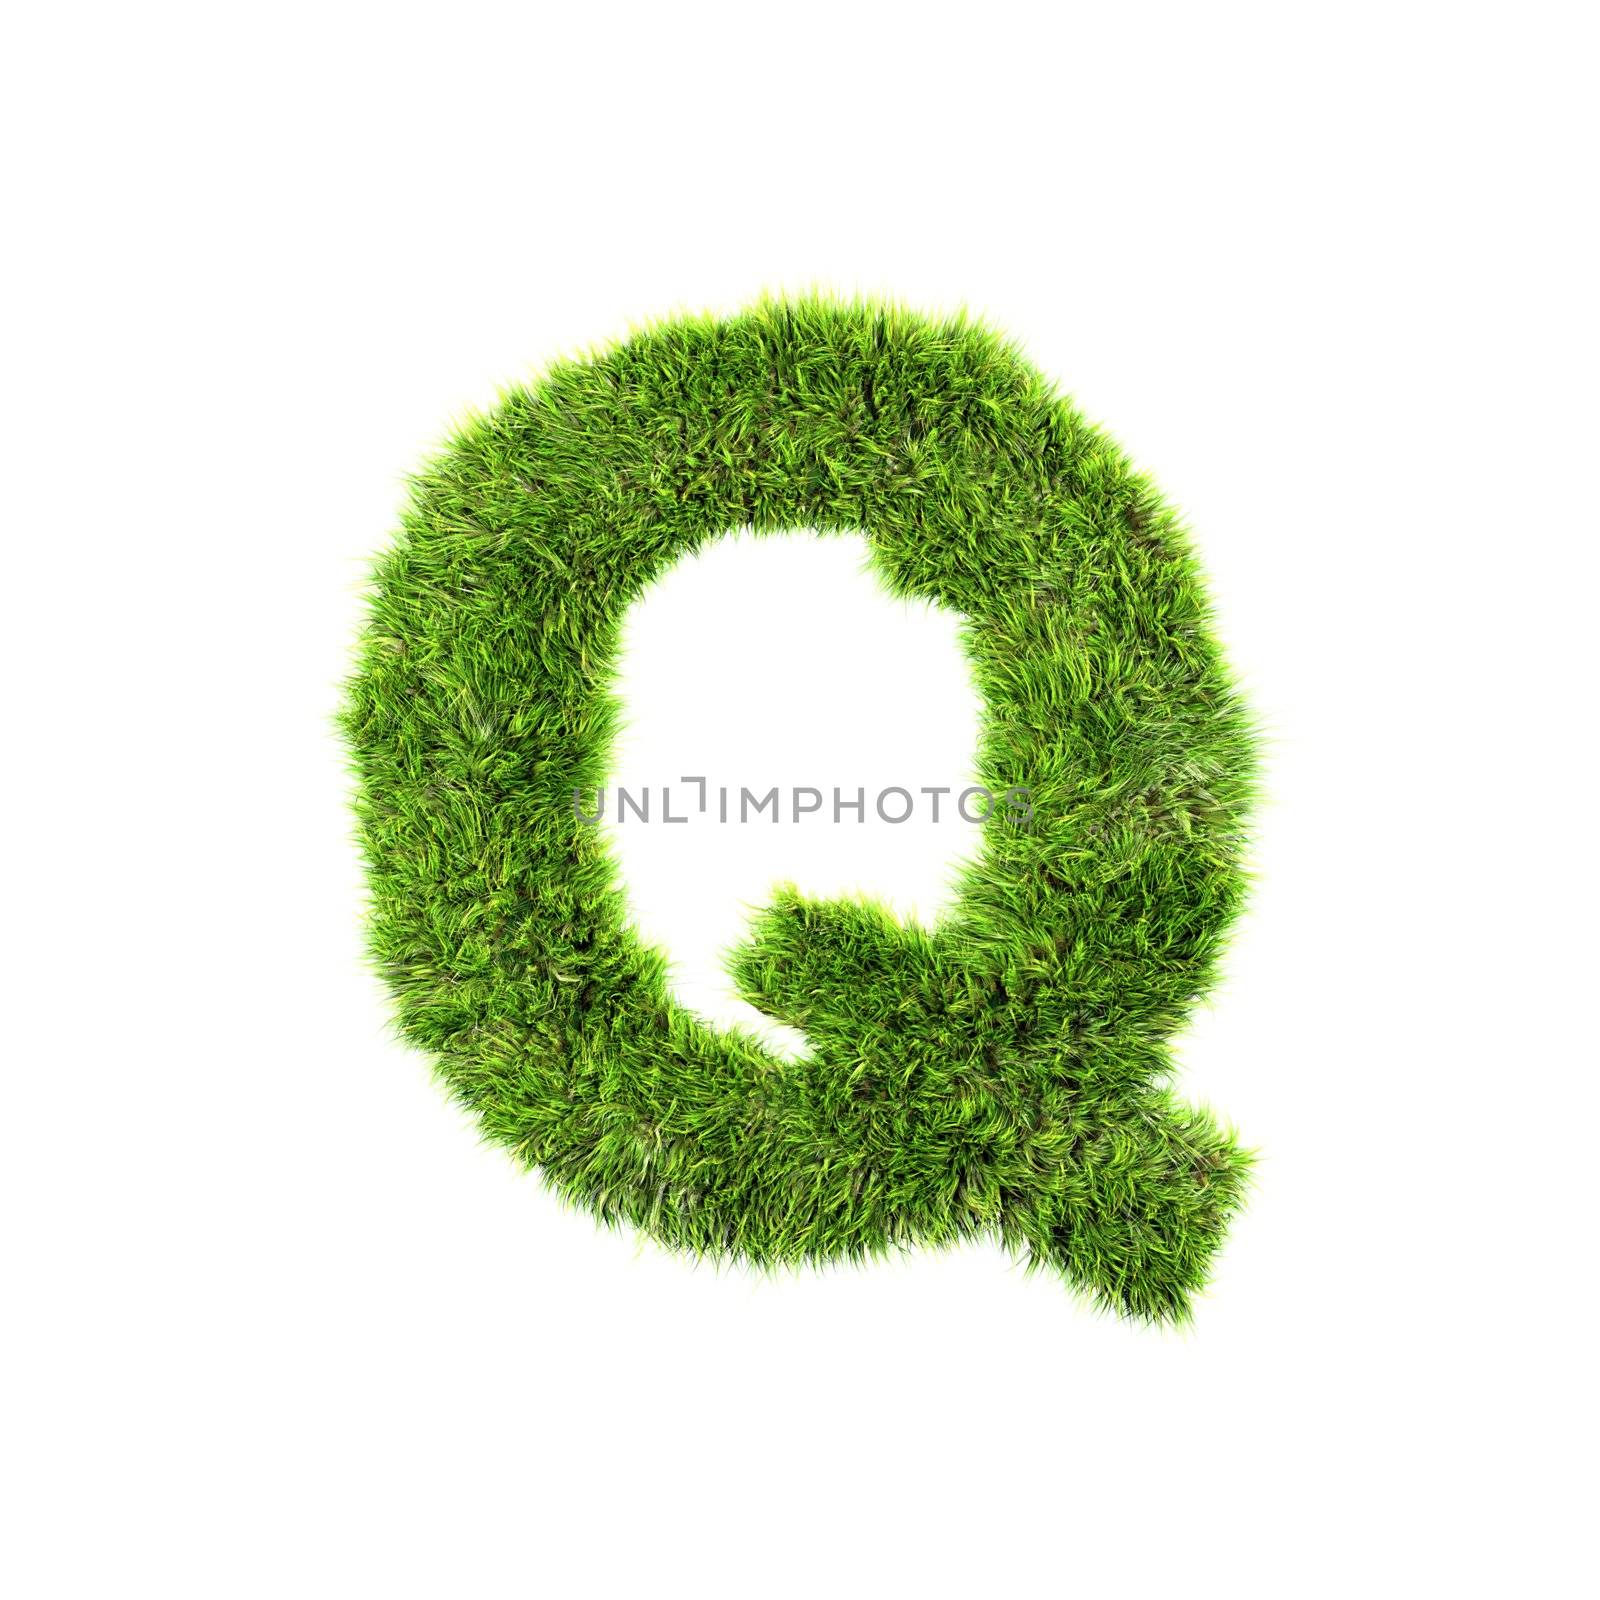 3d grass letter isolated on white background - Q by chrisroll